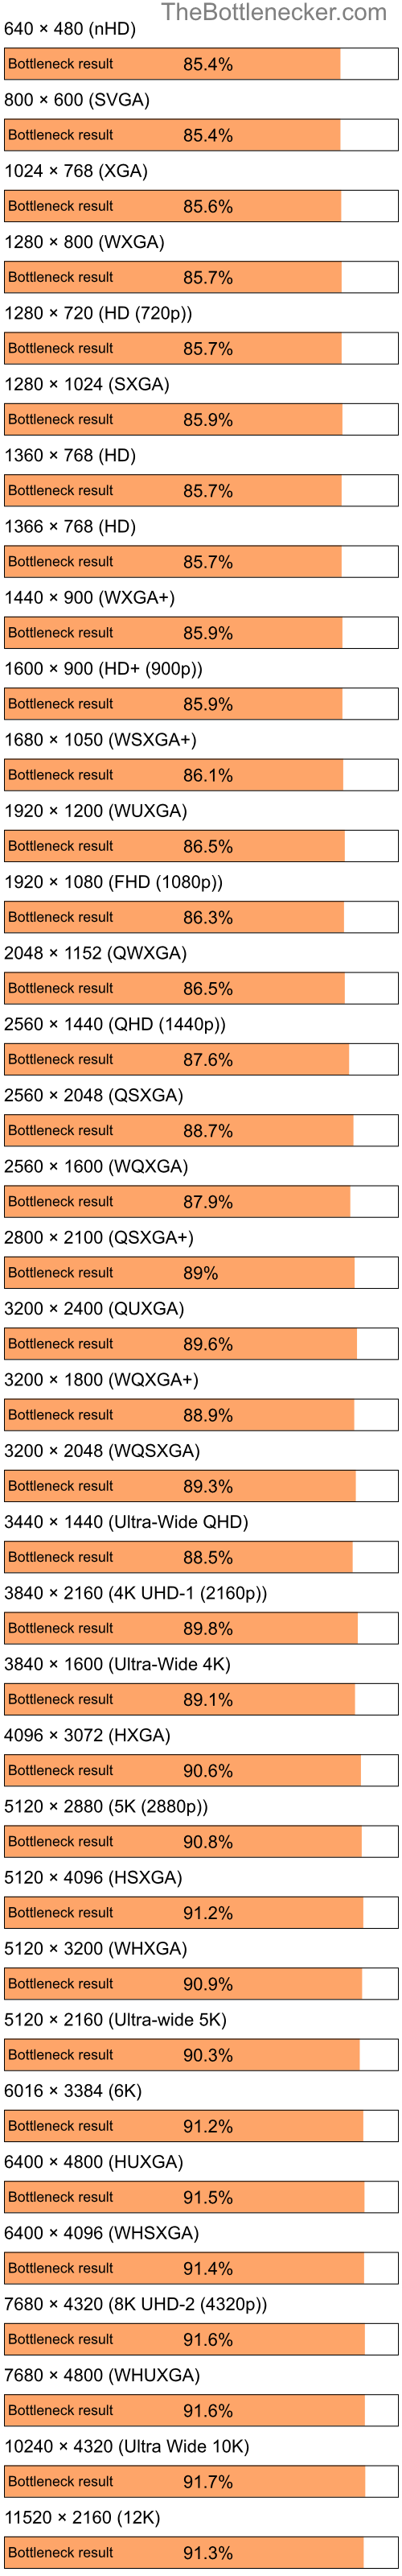 Bottleneck results by resolution for Intel Celeron M 420 and NVIDIA GeForce4 MX Integrated GPU in Processor Intense Tasks